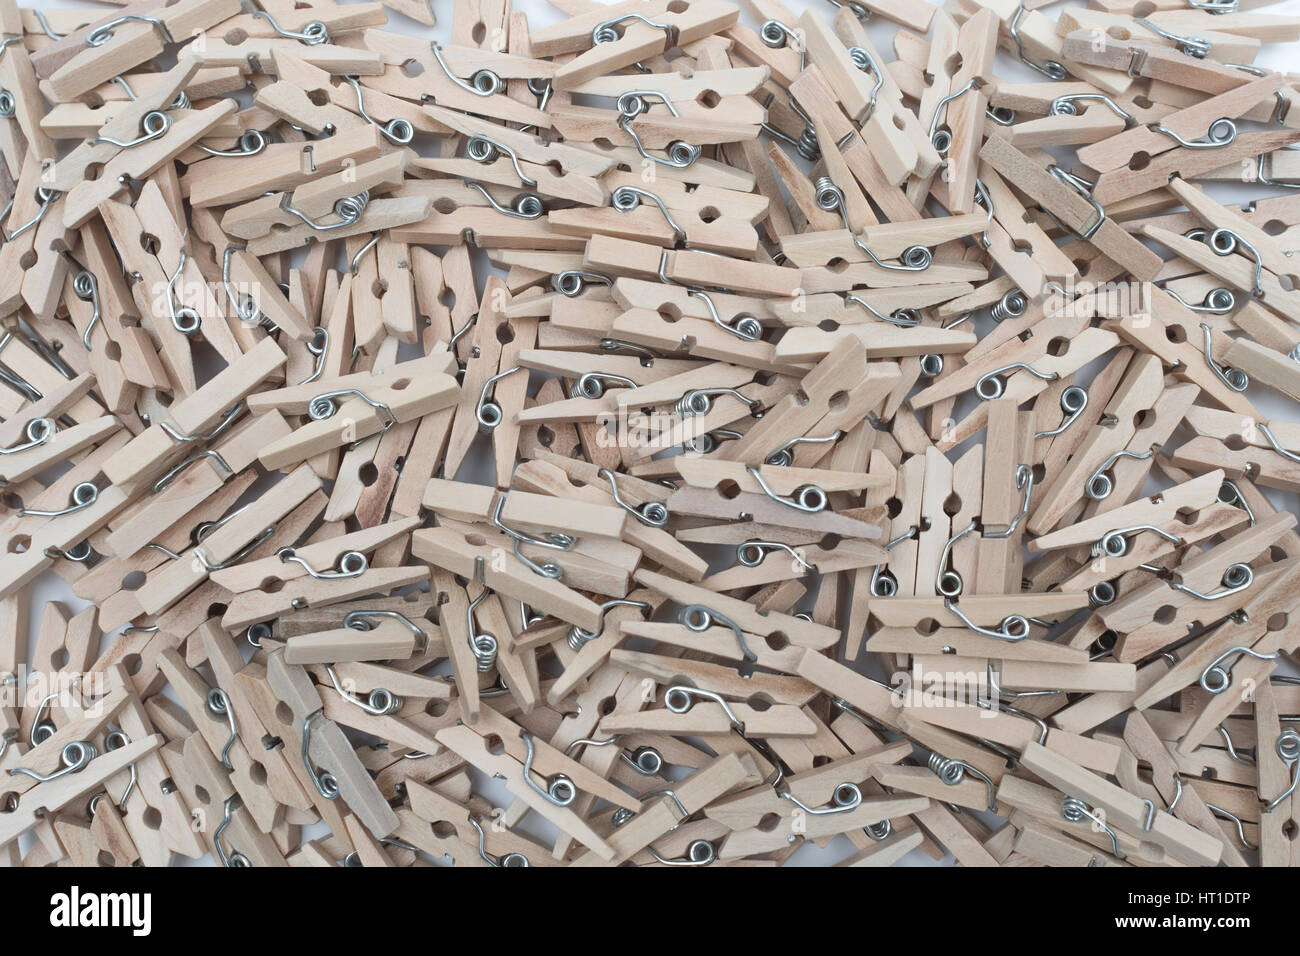 Macro photo of wooden mini clothes pegs. Metaphor for currency pegging - chinese yuan to dollar, for example. Stock Photo